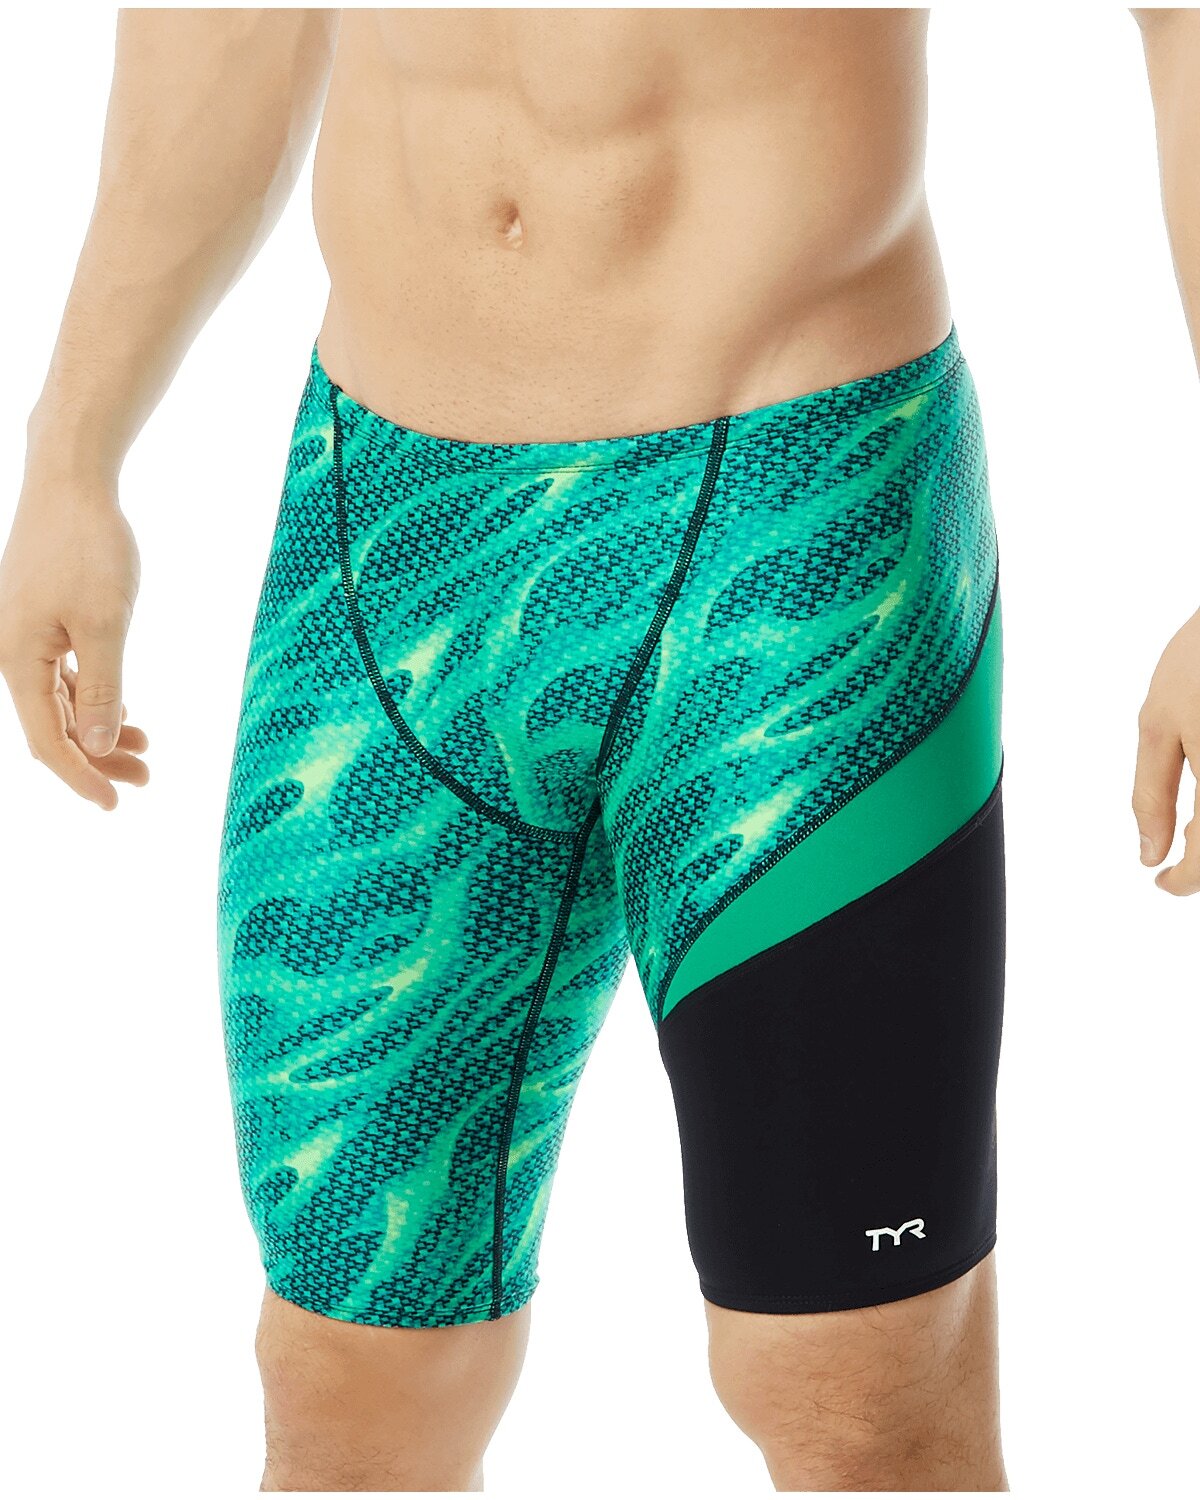 TYR Green Reaper Wave Jammer Size 28